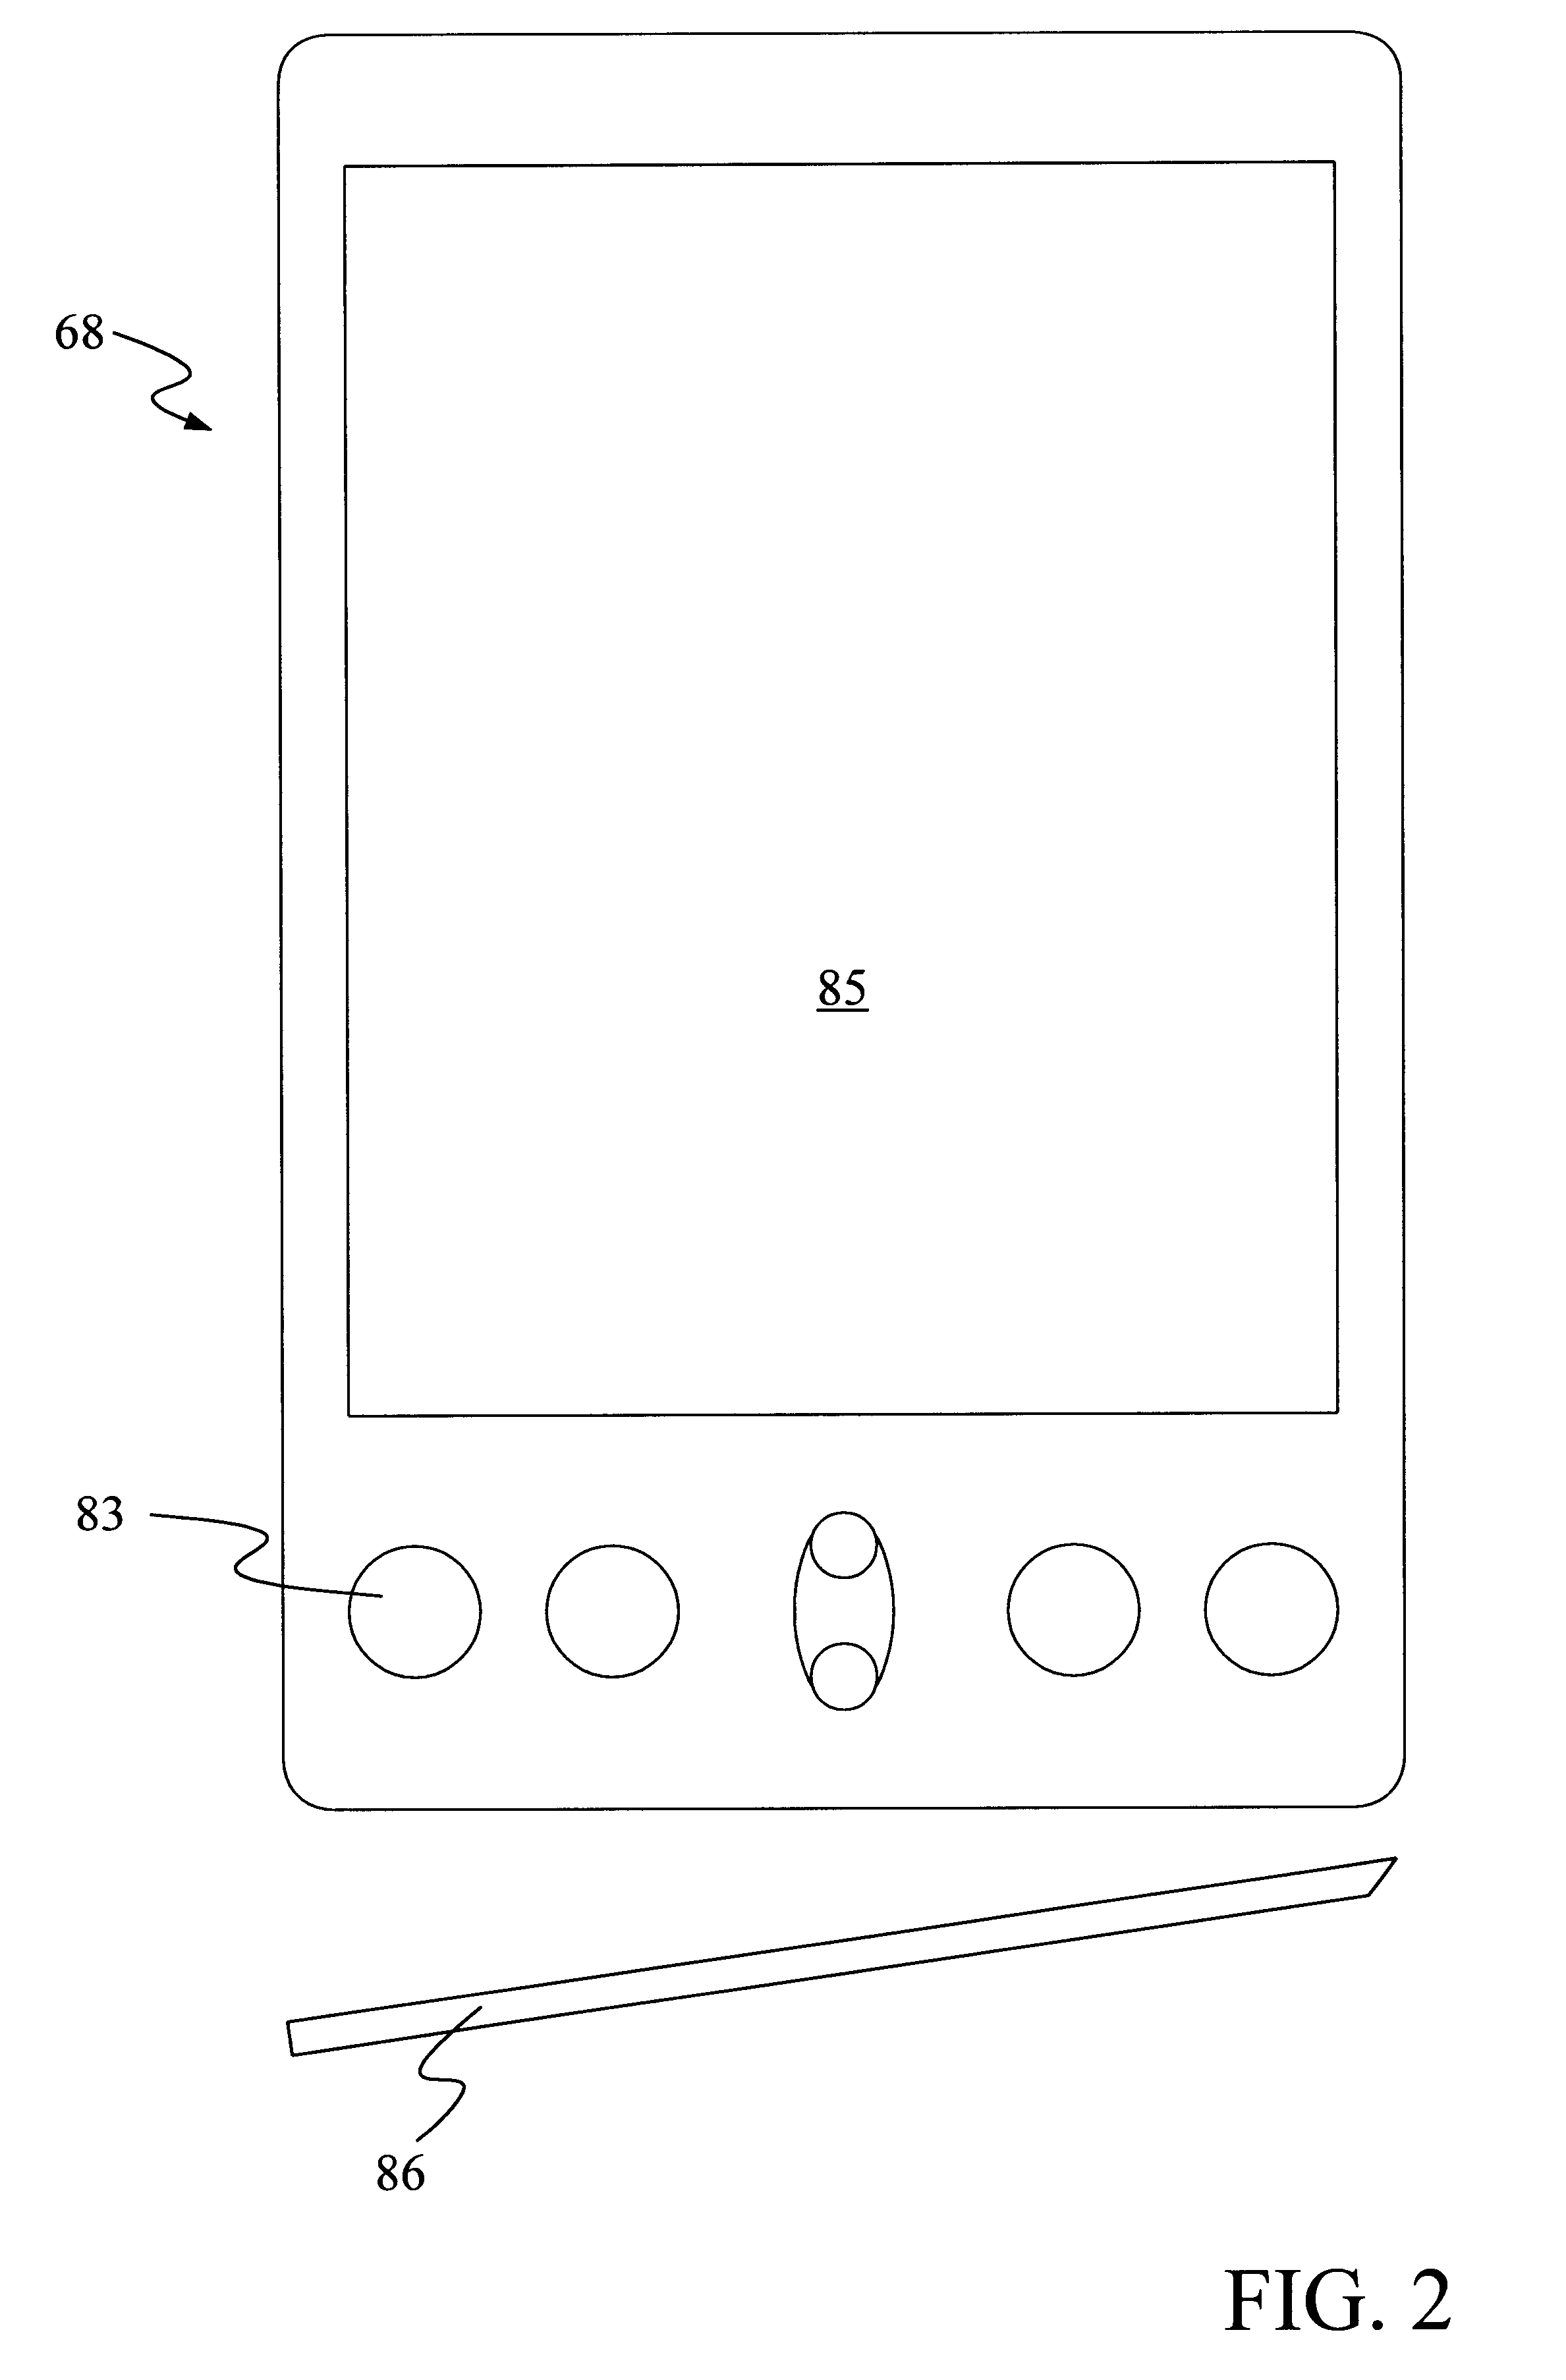 Method and apparatus for providing recent categories on a hand-held device